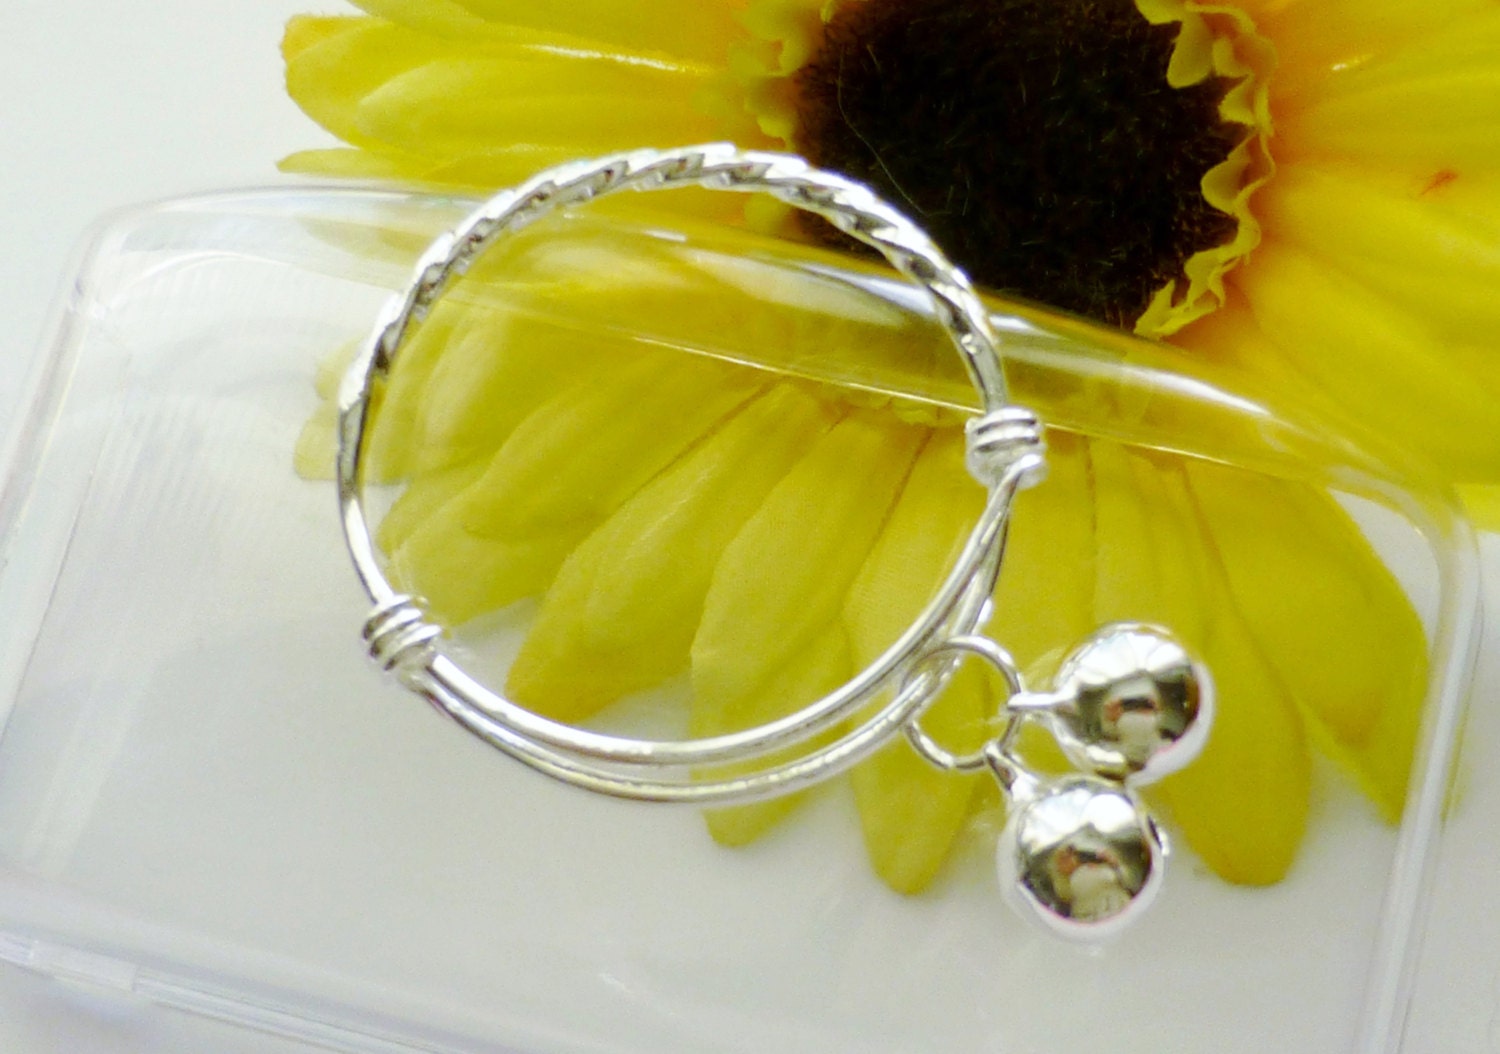 baby silver bangles wave design - pair of bangle bracelets with jingle bell charms